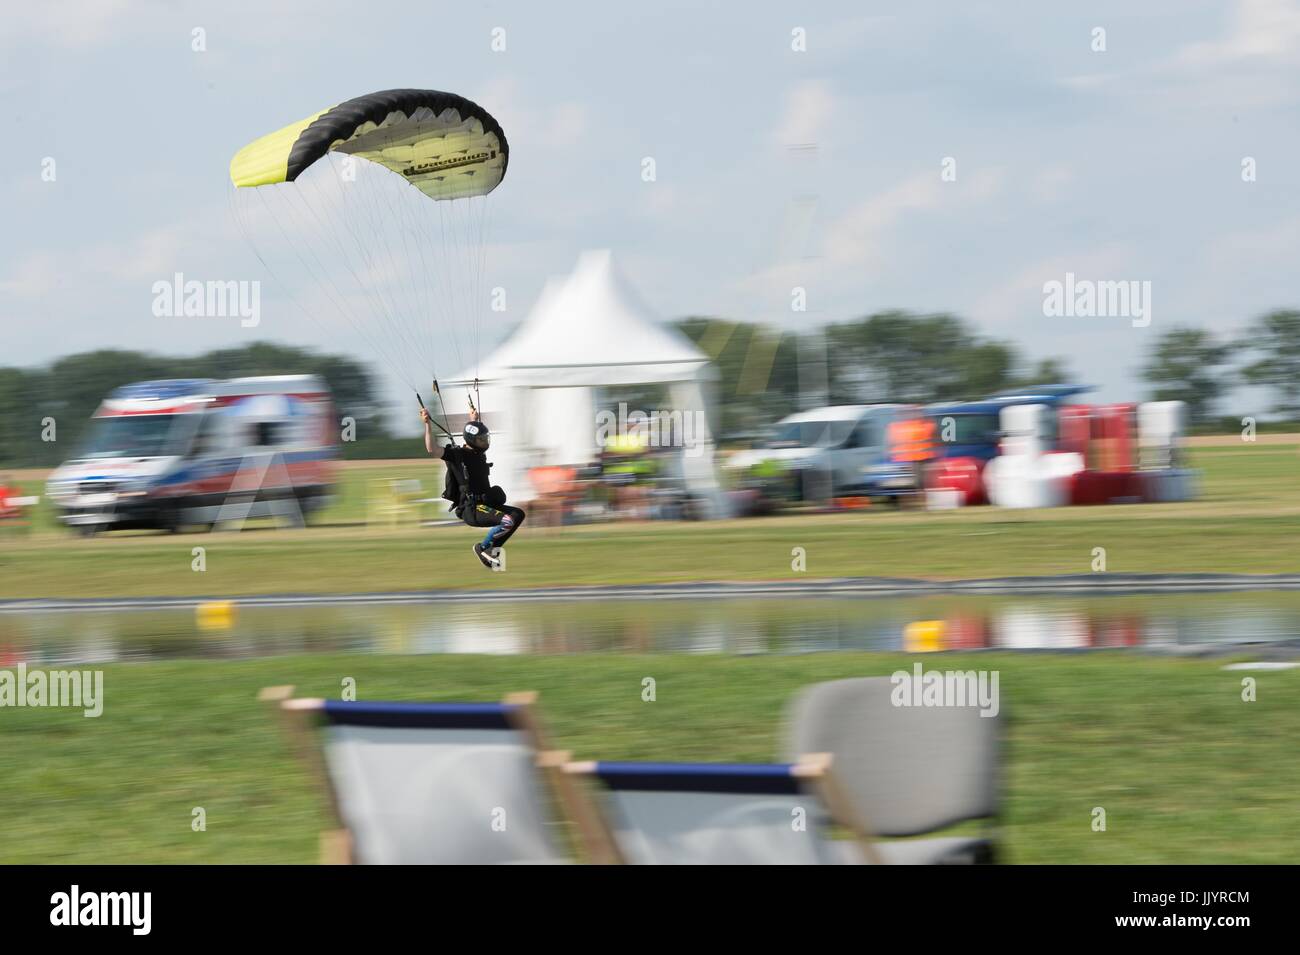 Wroclaw, Poland. 21st July, 2017. The World Games, an international multi-sport event is hold on July 20 in Wroclaw, Poland In the picture: Parachuting Credit: East News sp. z o.o./Alamy Live News Stock Photo